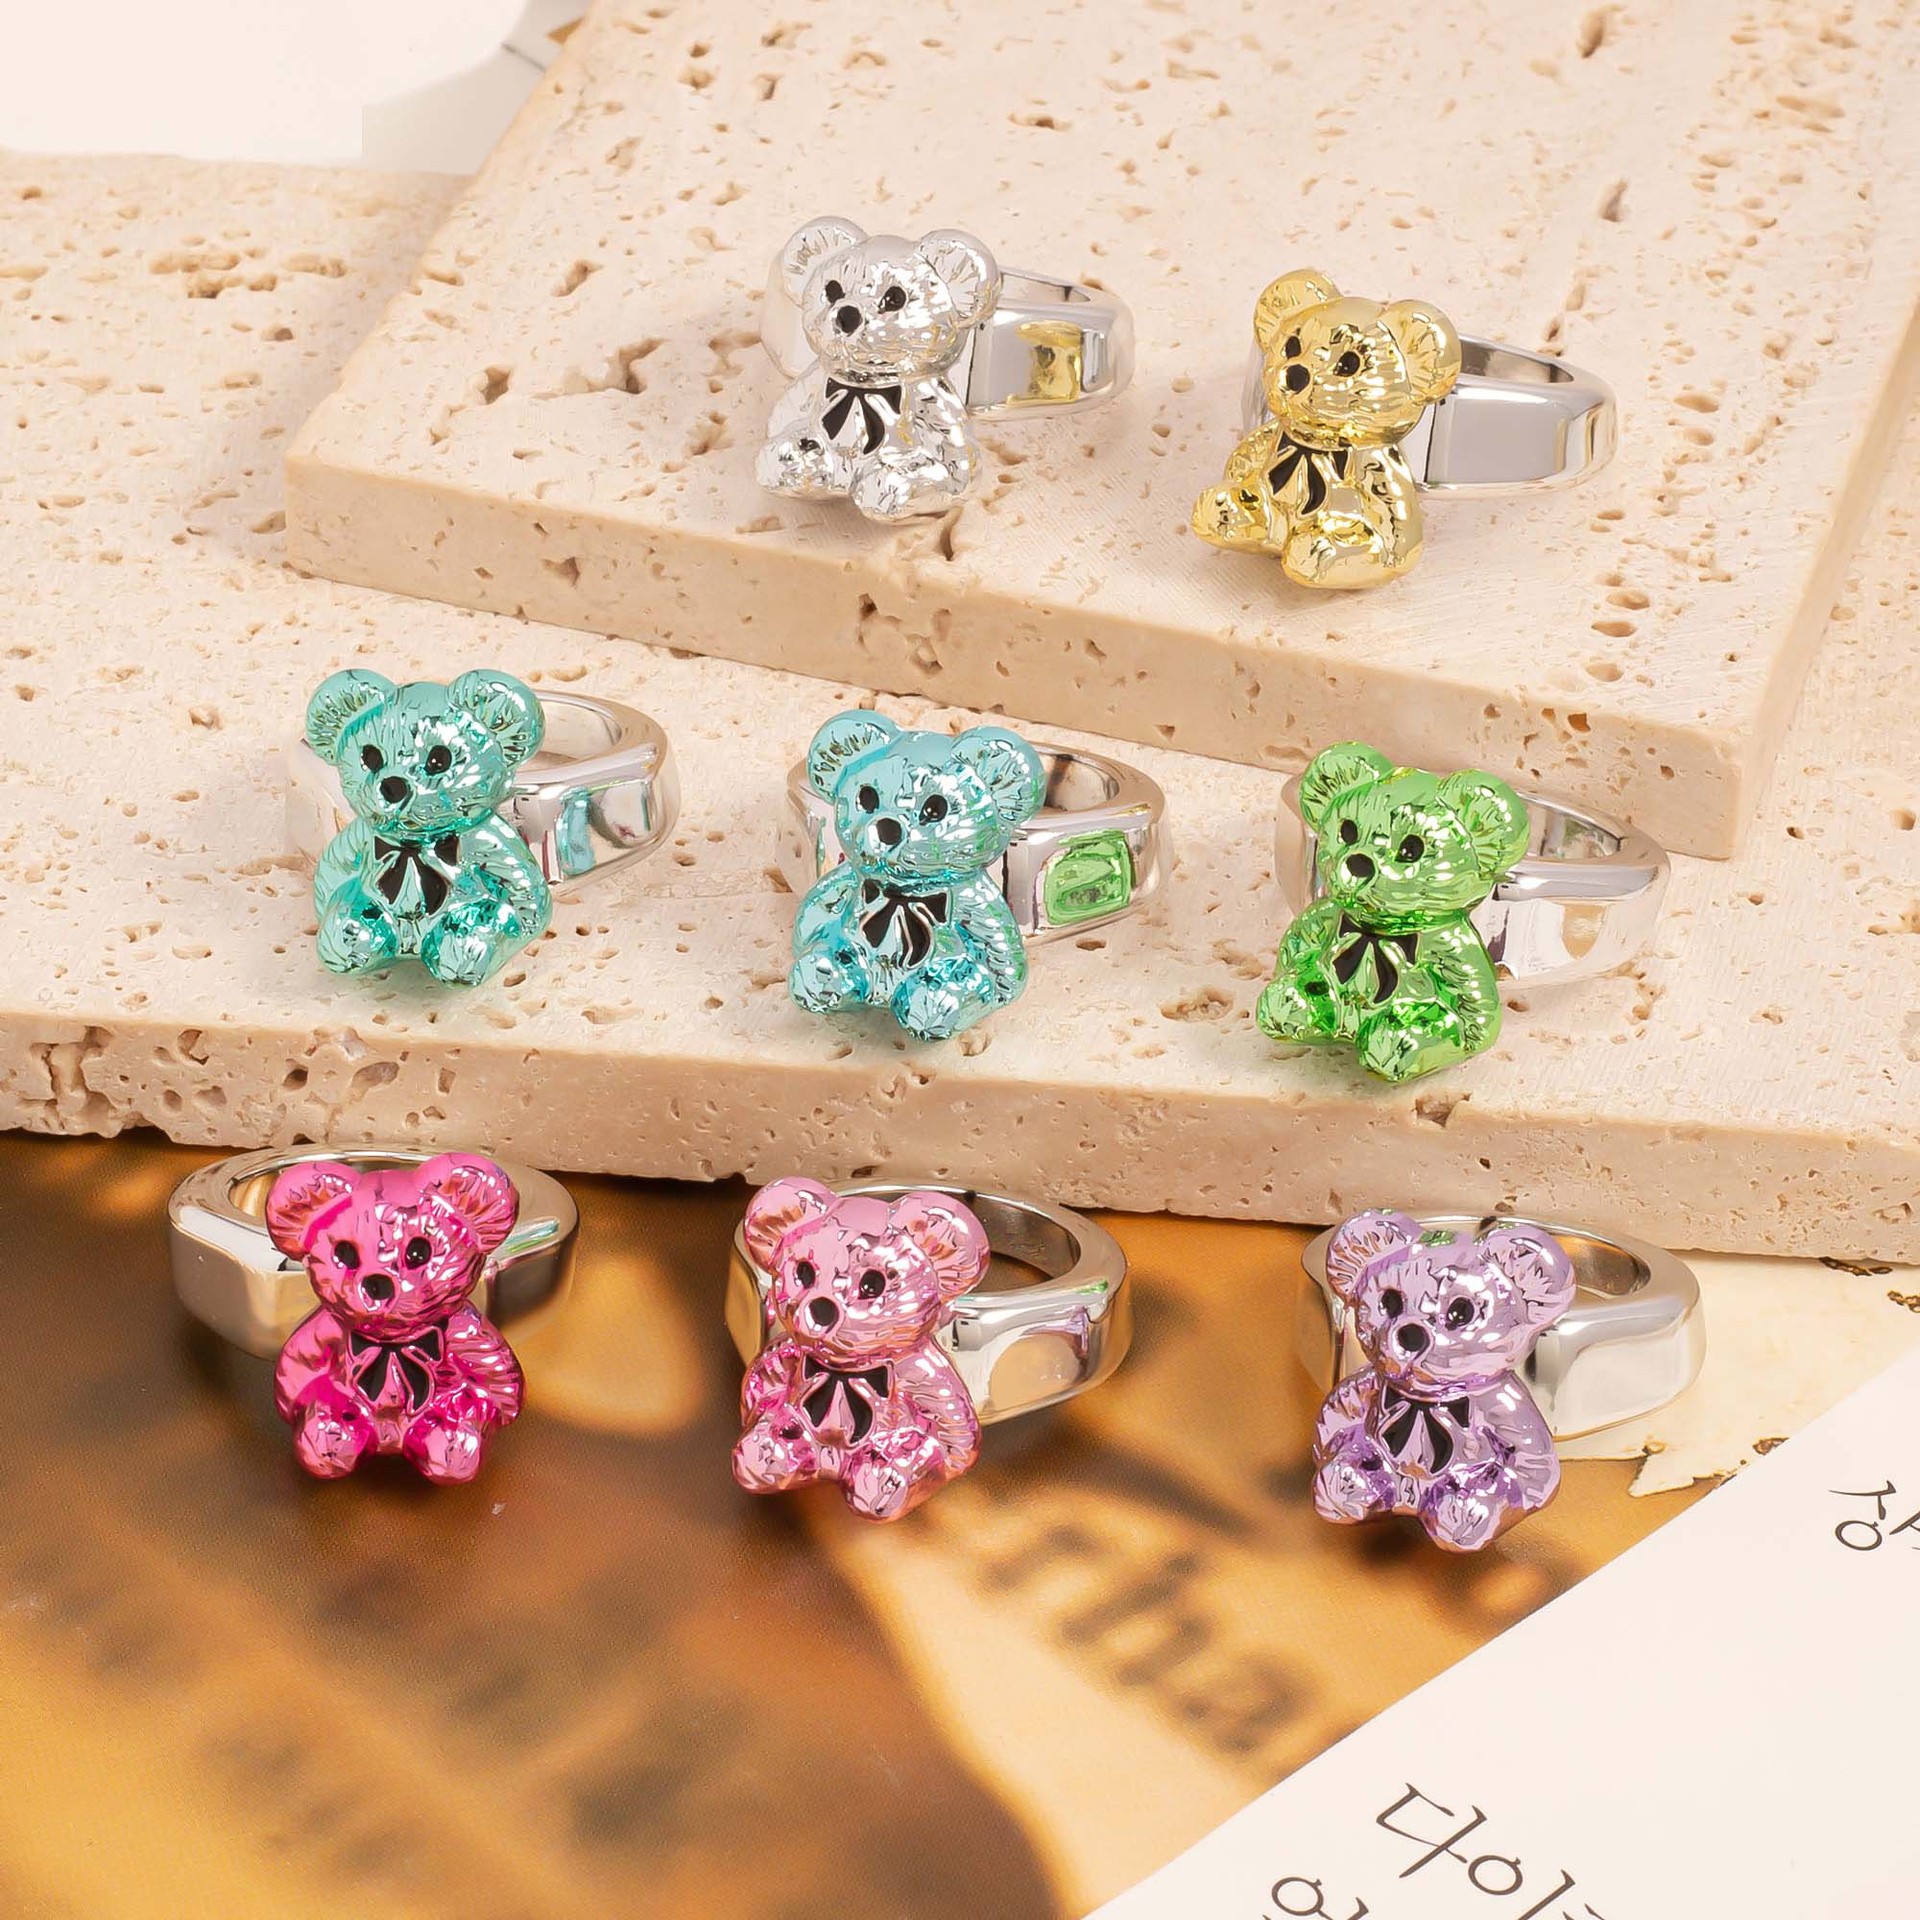 Cute Bear Tie Ring Electroplated Color Retaining Colorful Dream Minority Simple Versatile Design Sense Animal Little Finger Ring